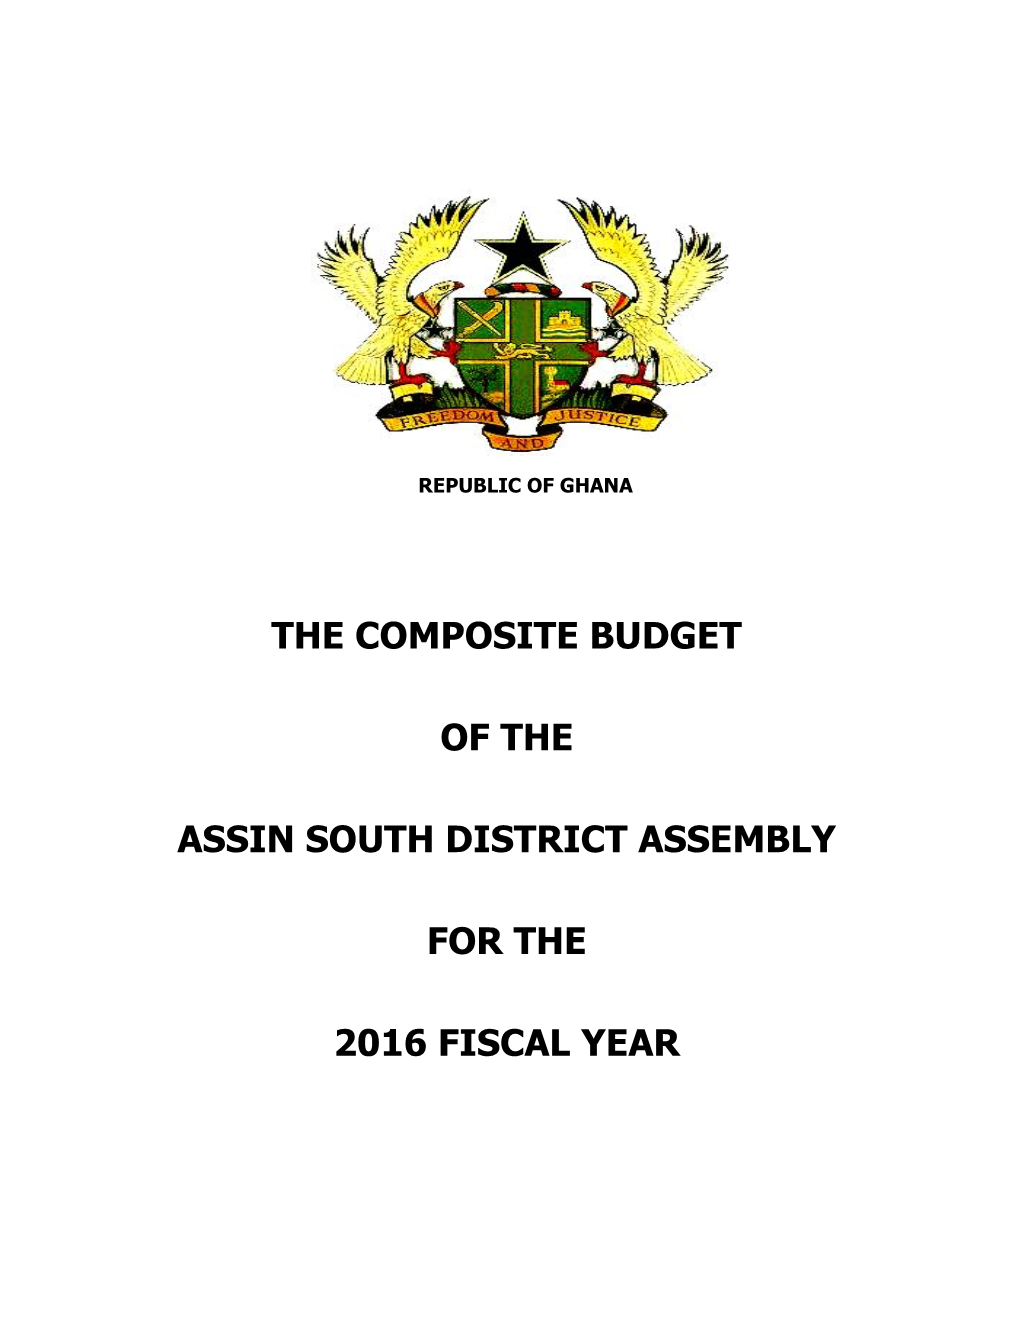 The Composite Budget of the Assin South District Assembly for the 2016